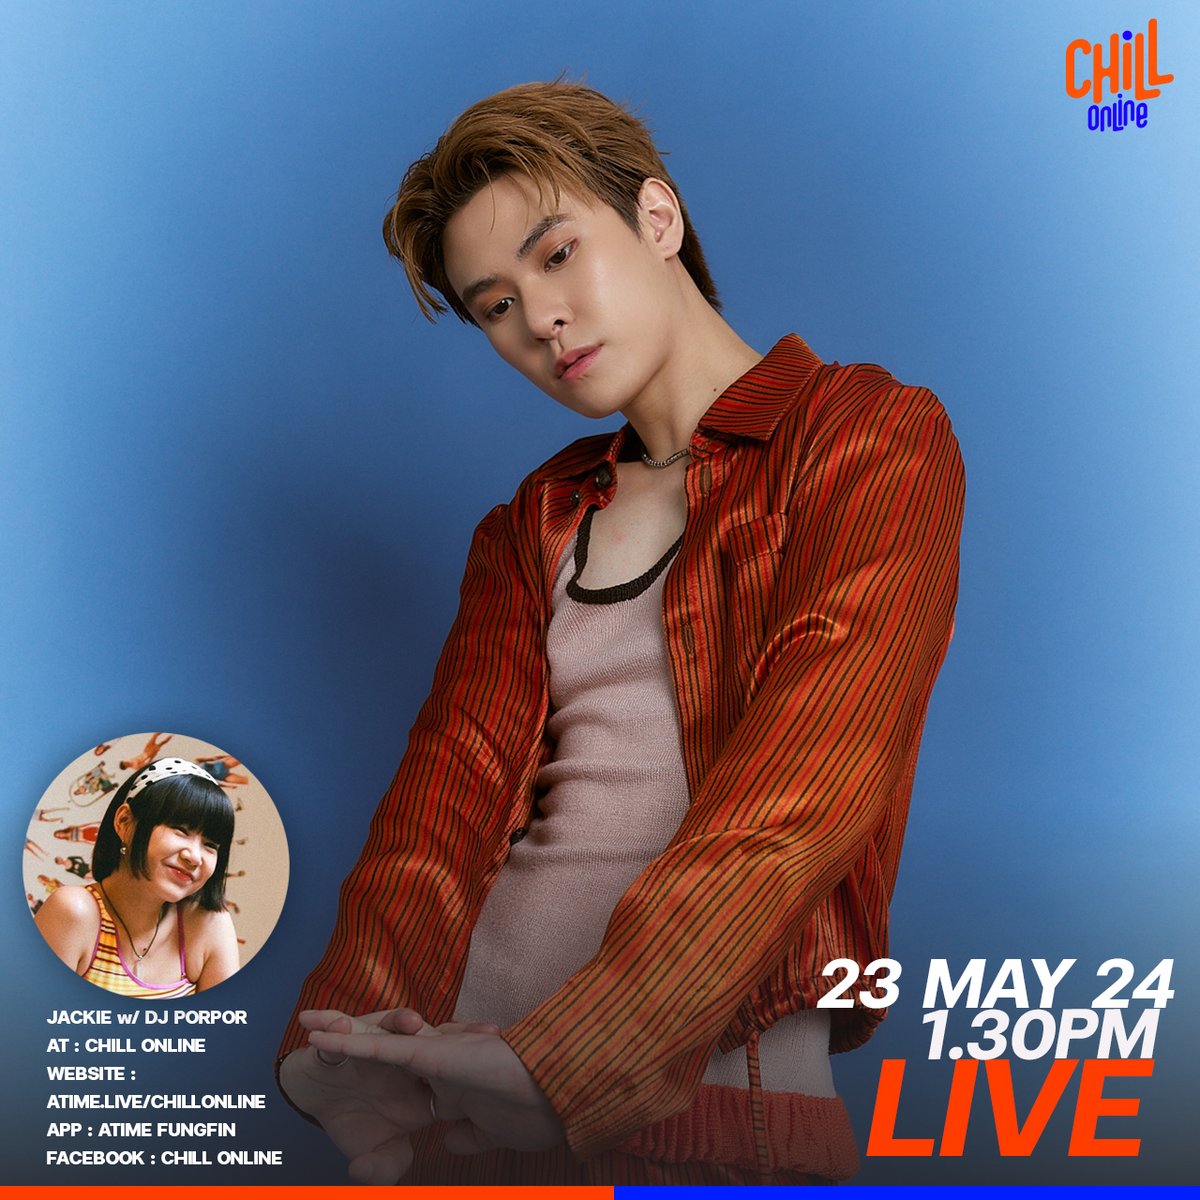 LIVE INTERVIEW JACKIE w/DJ PORPOR at Chill Online 23 MAY 24 1.30 PM atime.live/chillonline or application : Atime Fungfin Facebook : Chill Online Stay Tuned! . #ChillOnline #WorkingChillingShopping #Jackie_SUNSHINE #JackieJackrin #JackieJackrinSUNSHINExChillOnline